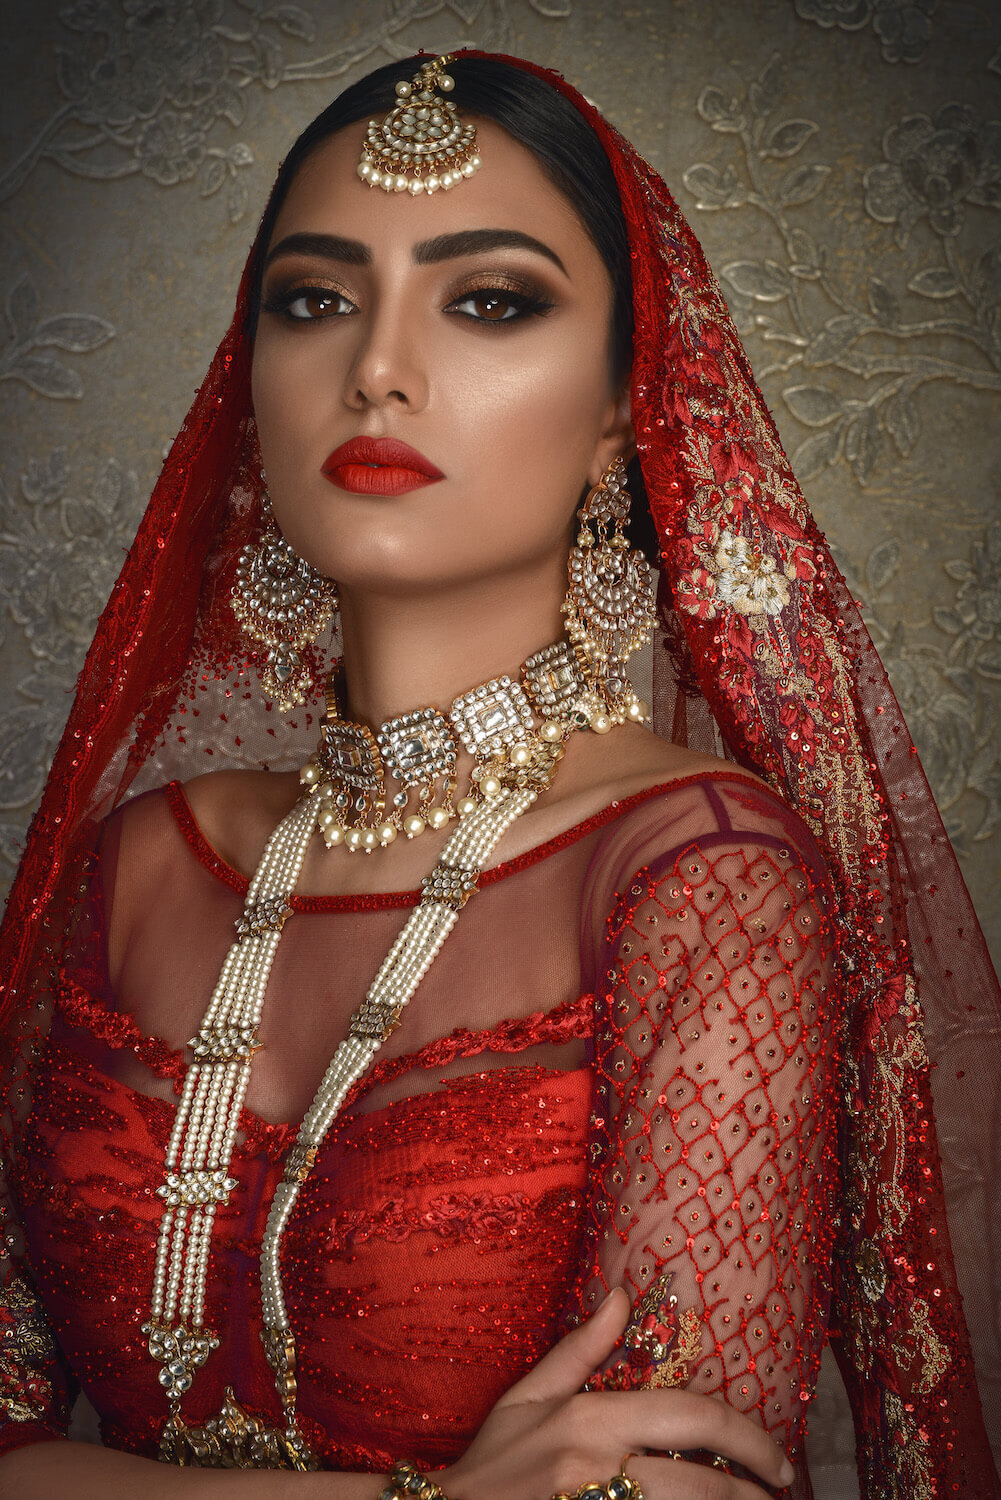 Beautiful bride wearing a red wedding outfit